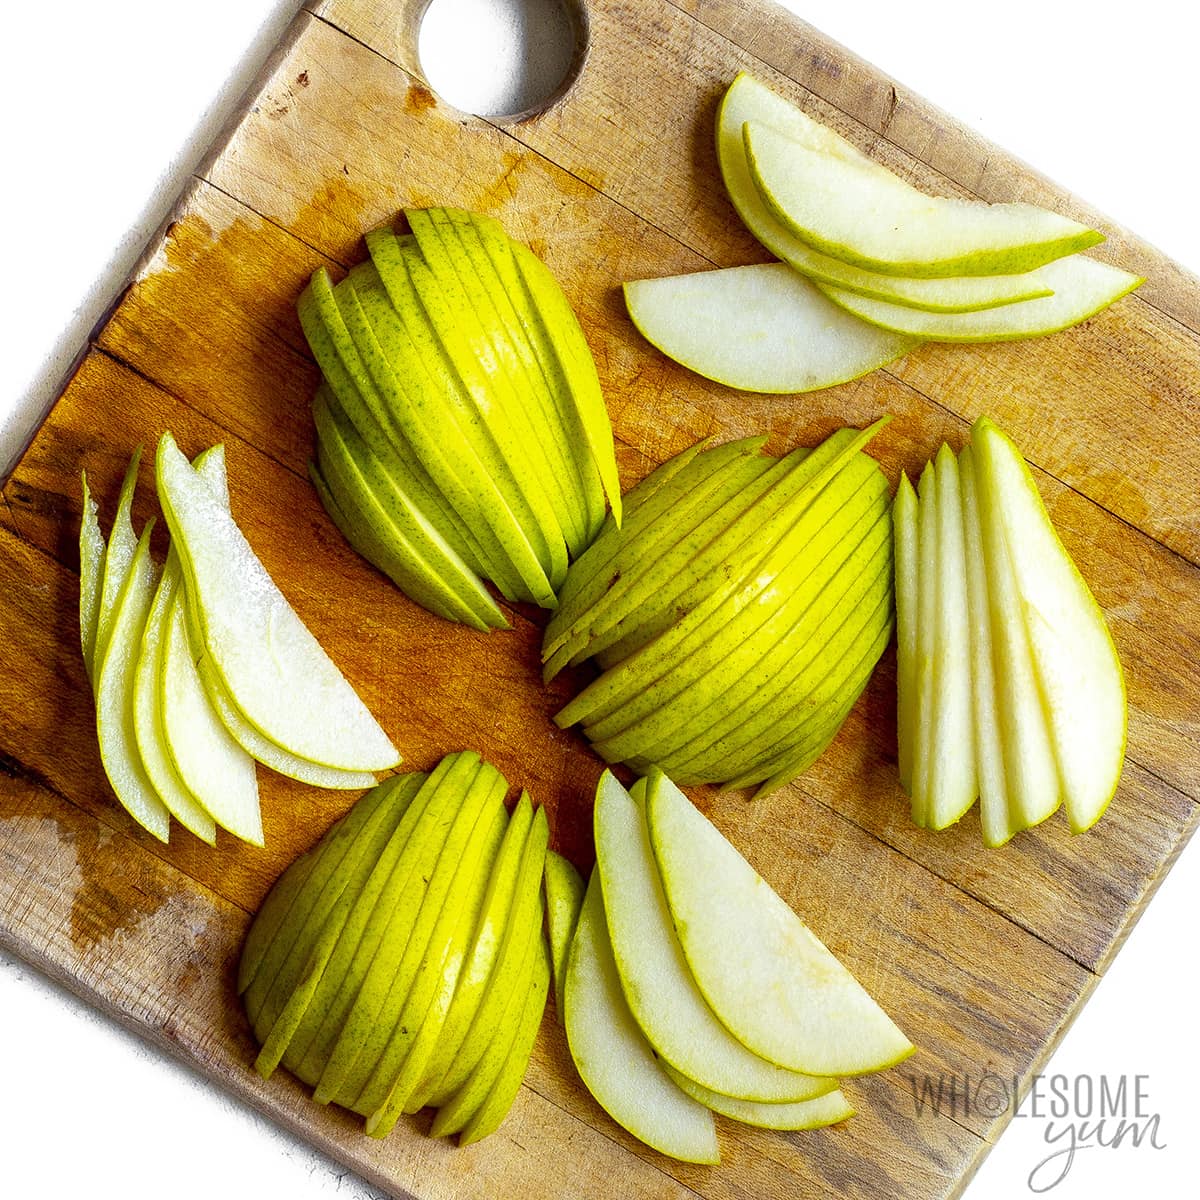 Slices of pears on a cutting board.